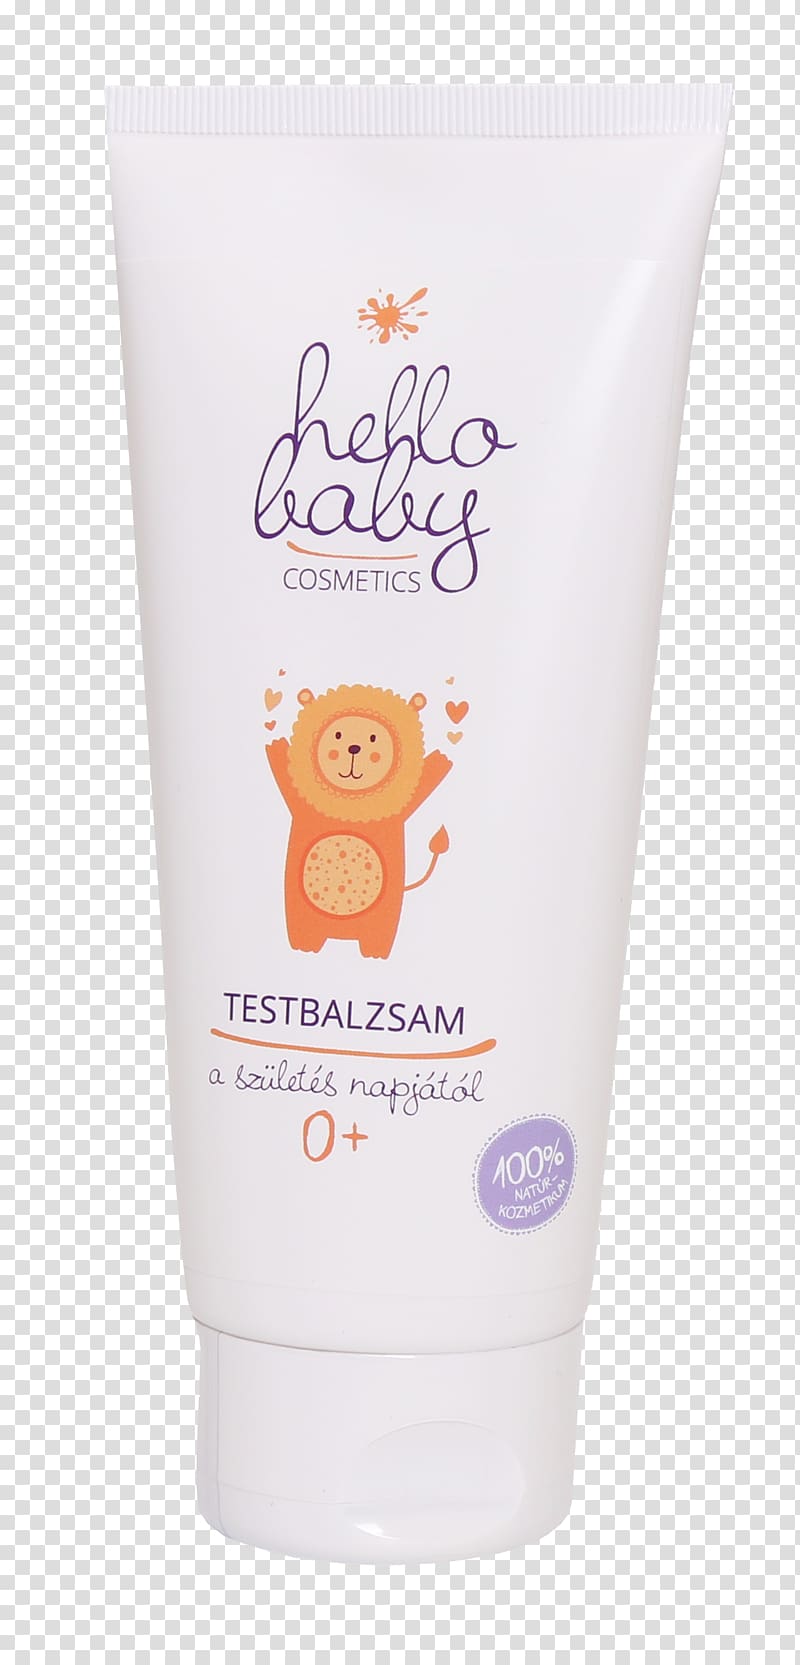 Cream Infant Lotion Mamas & Papas Sunscreen, others transparent background PNG clipart